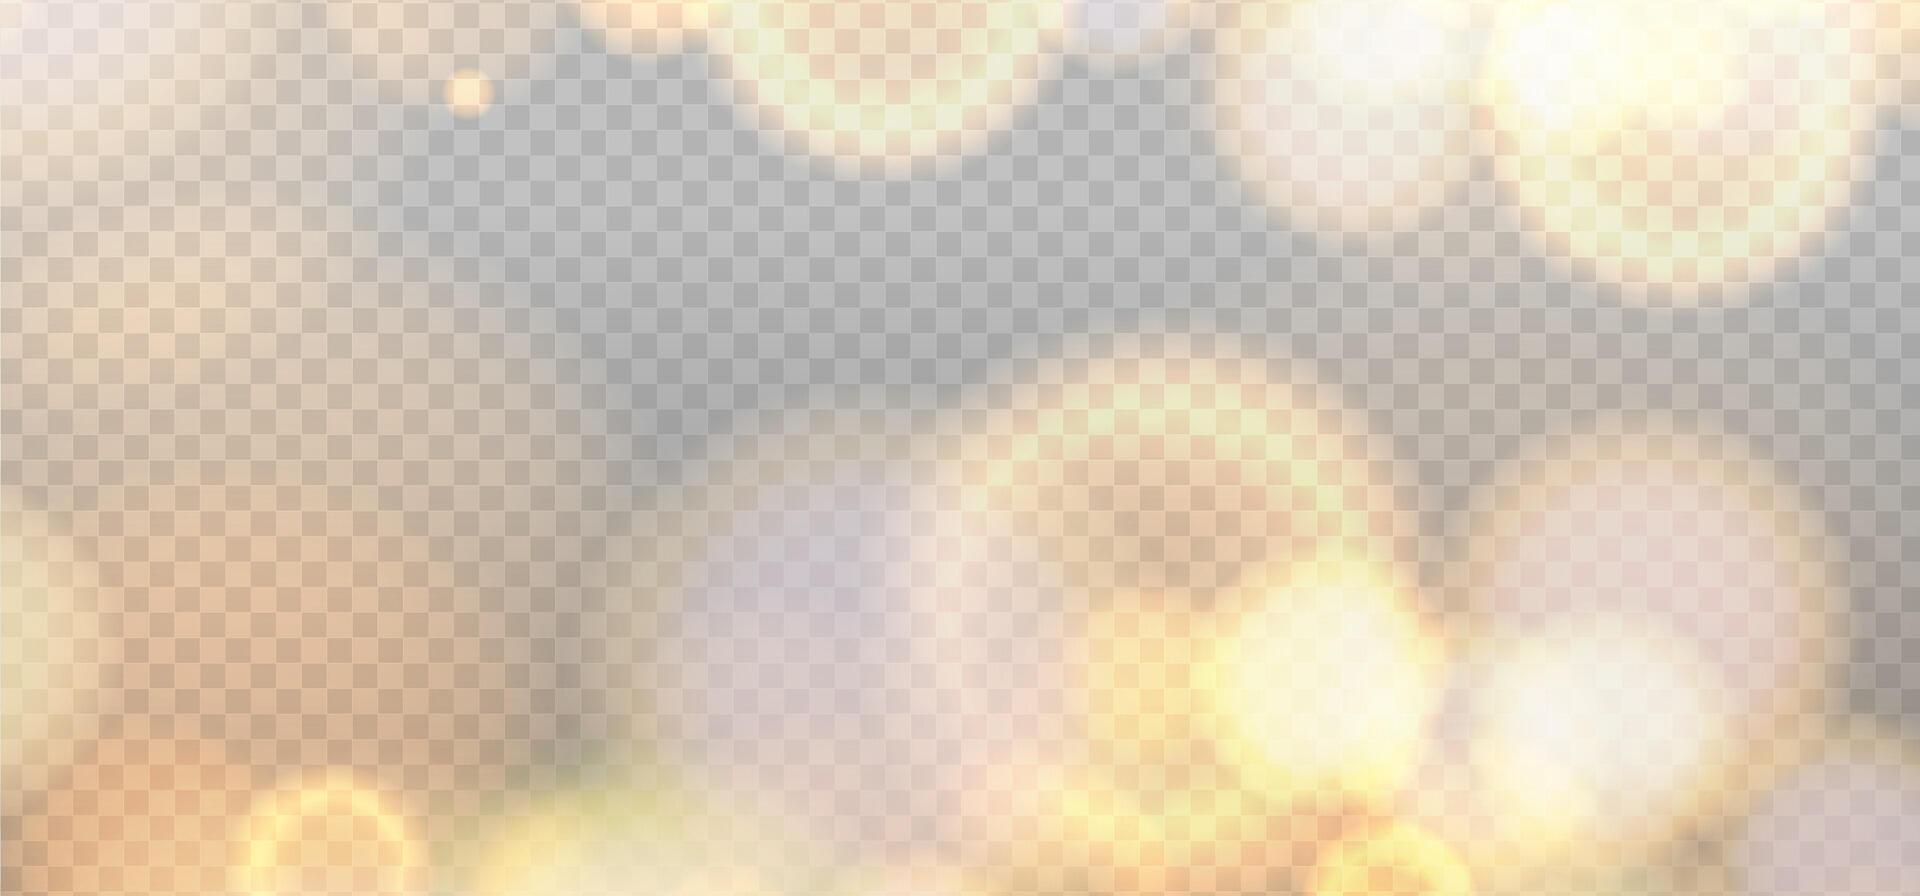 Golden blurred bokeh overlay template for holiday glowing. Happy holidays day shimmer backdrop. illustration on thiht background. vector